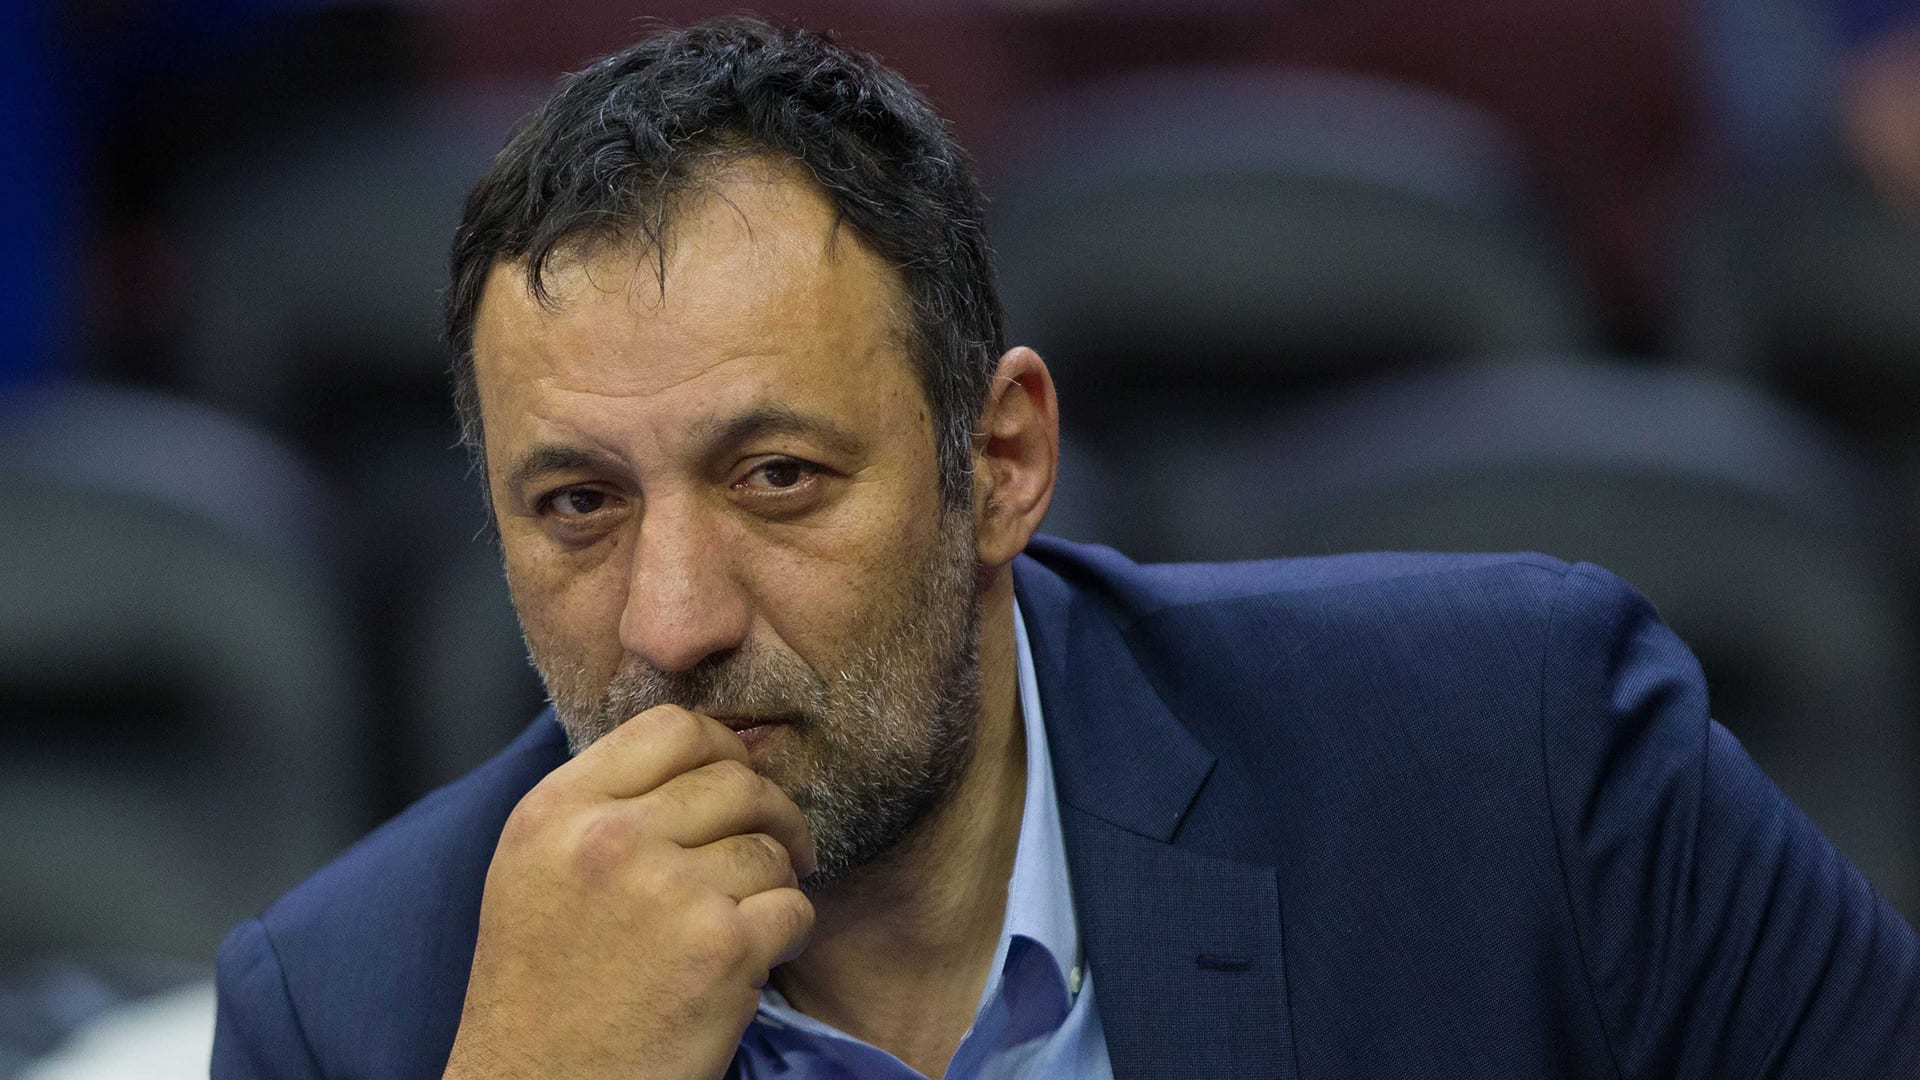 Former Kings player and GM Vlade Divac